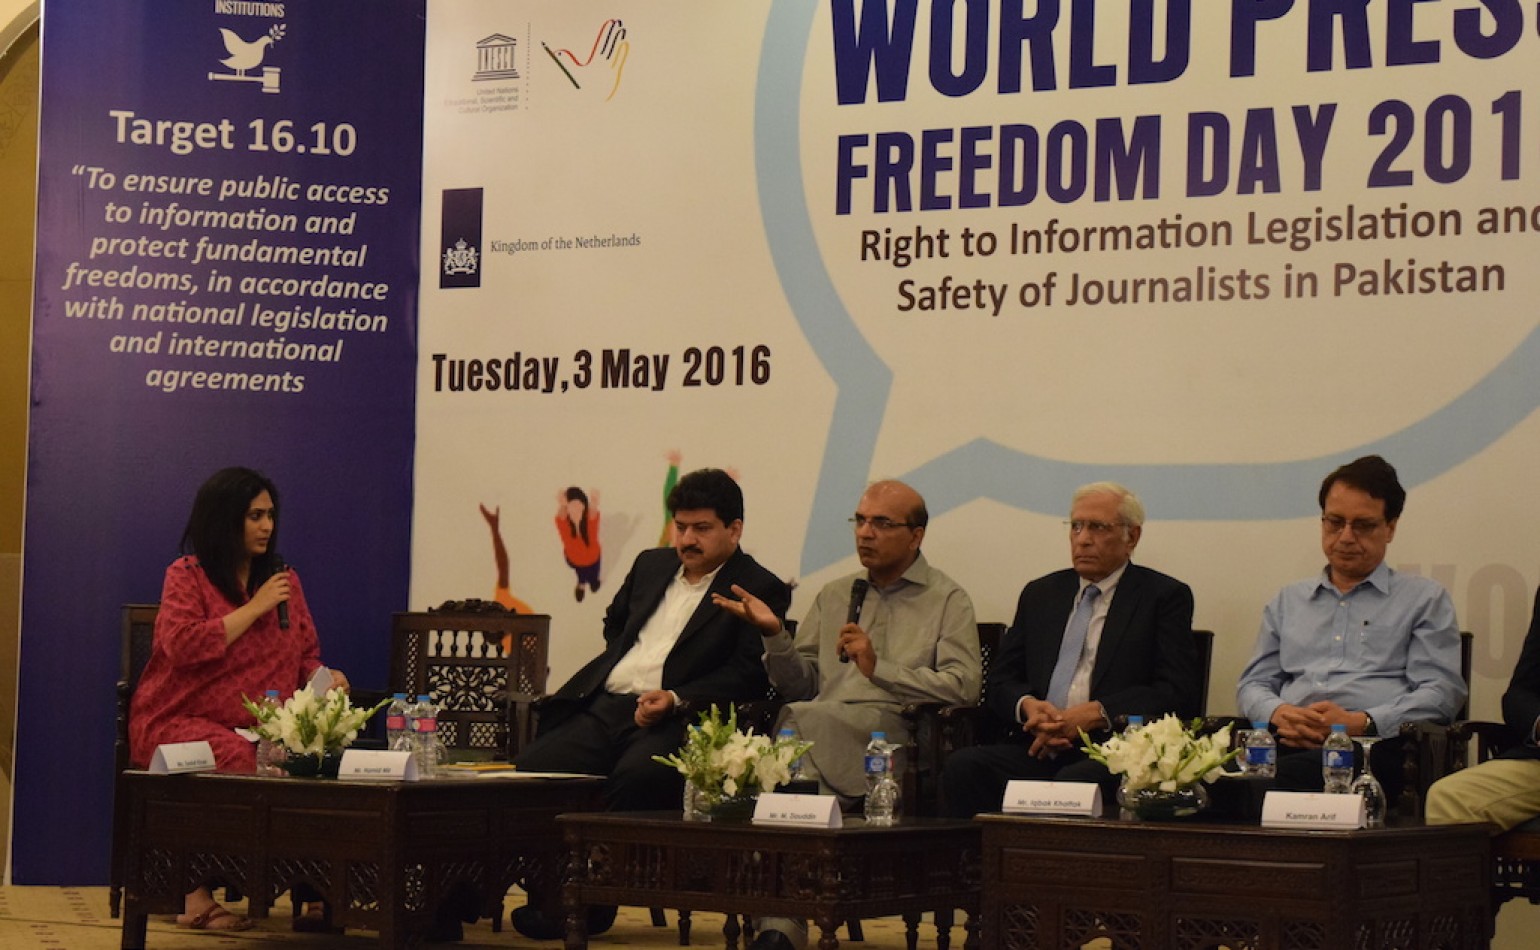 UNESCO, Media Matters for Democracy, Embassy of Netherlands and Center for Peace and Development Initiatives hosted World Press Freedom Day 2016 in Islamabad